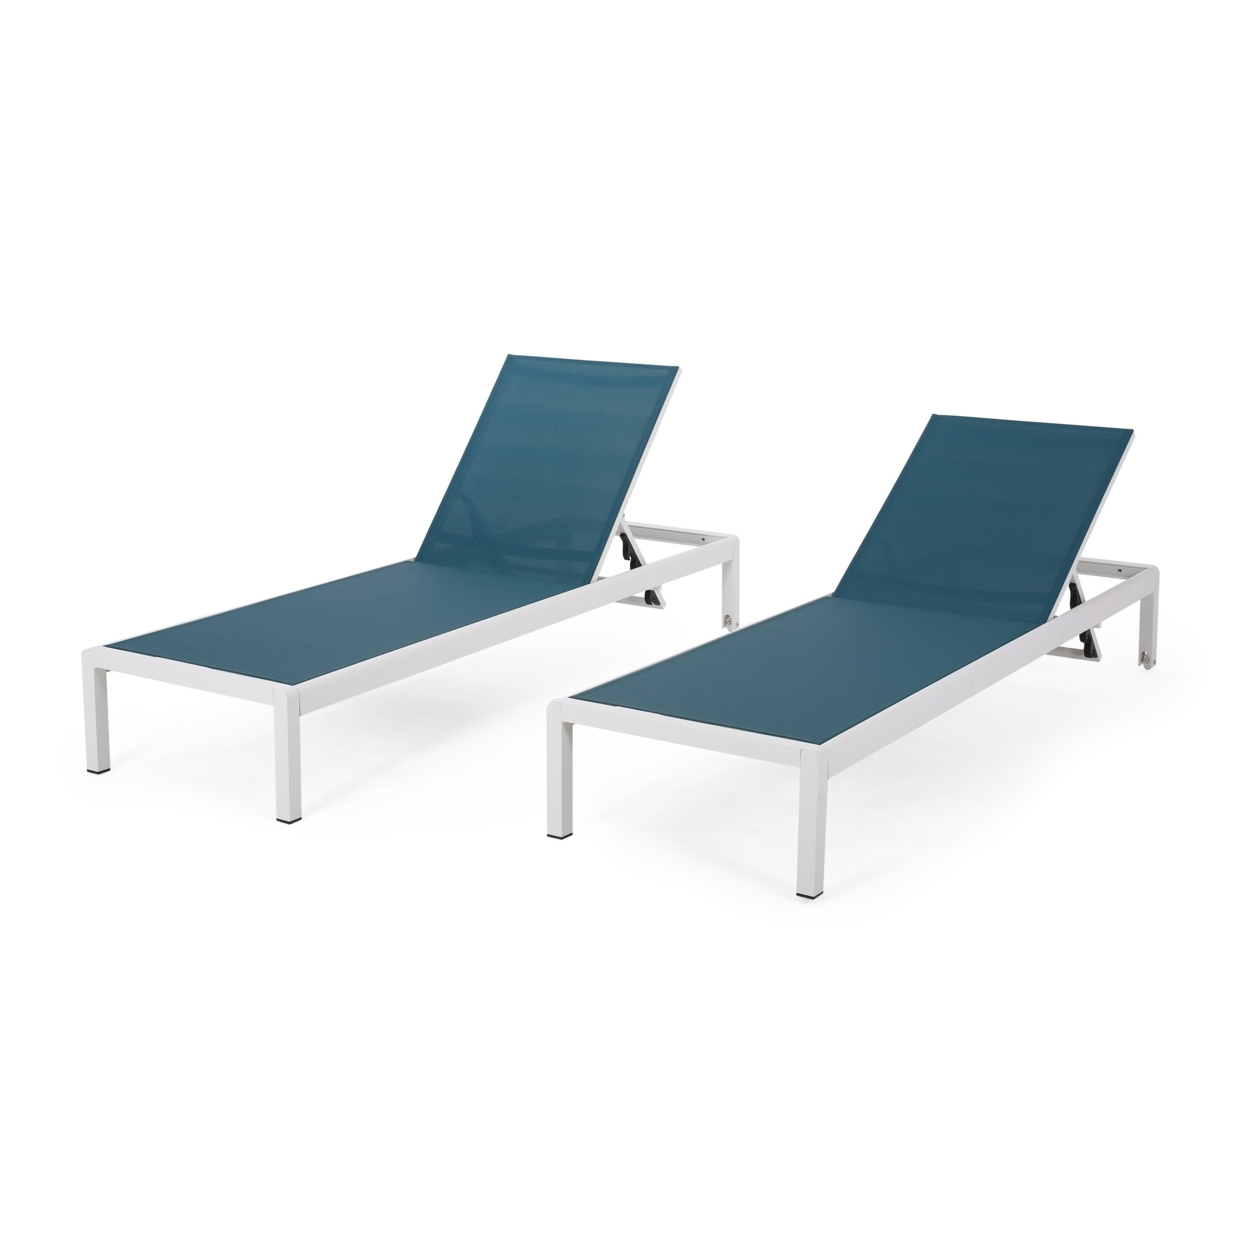 Cherie Outdoor Chaise Lounges (Set Of 2) - Green/white